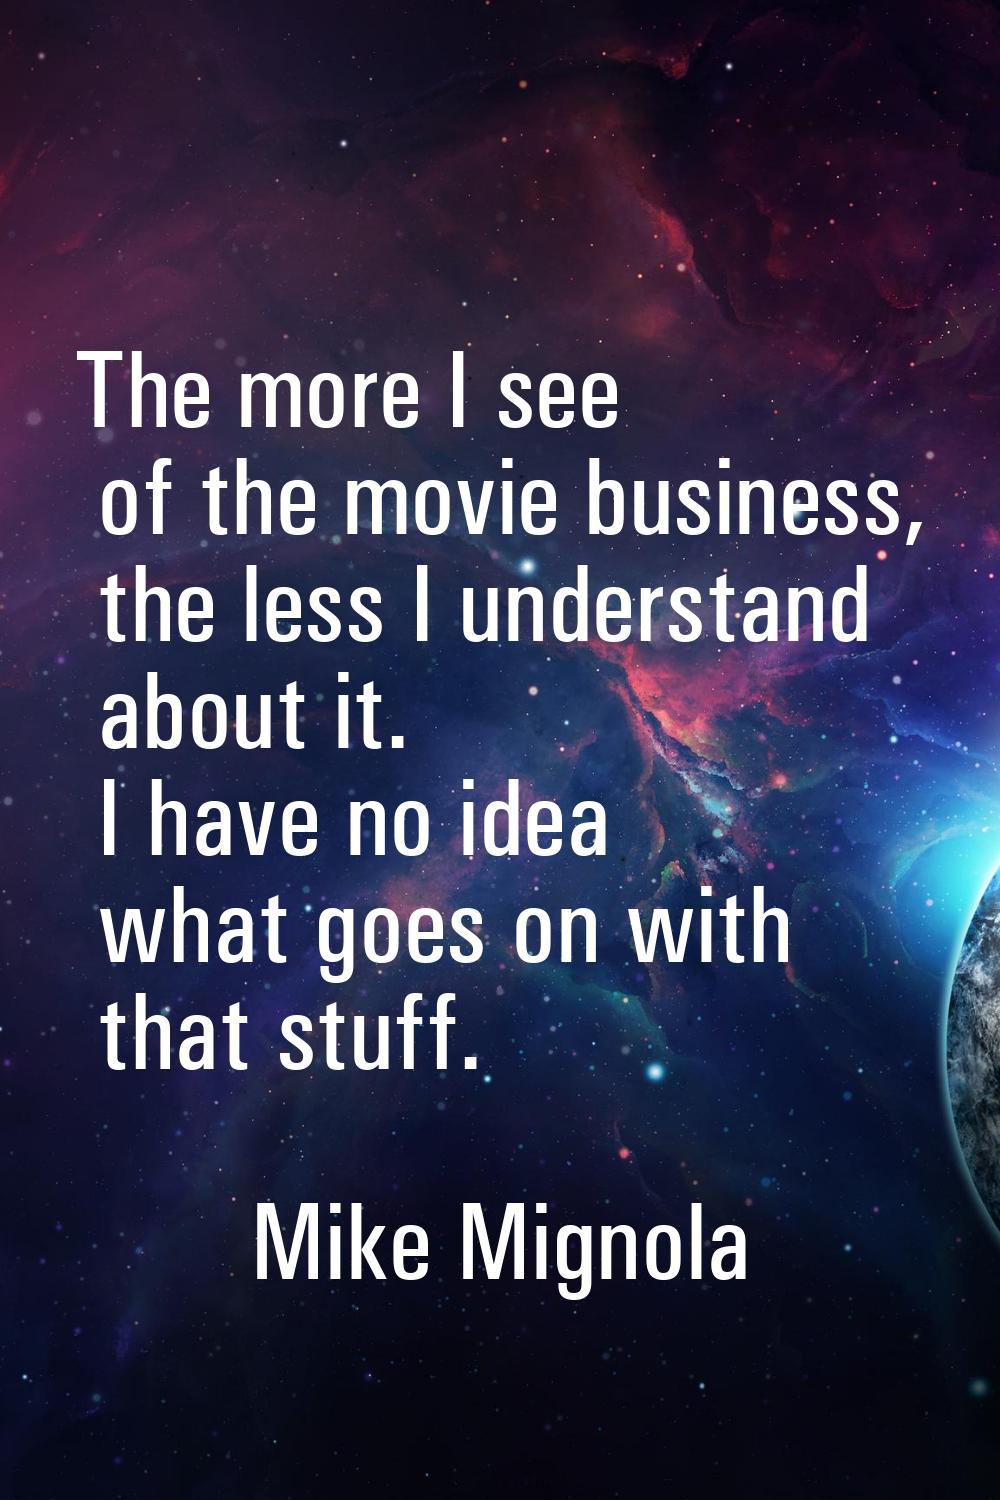 The more I see of the movie business, the less I understand about it. I have no idea what goes on w